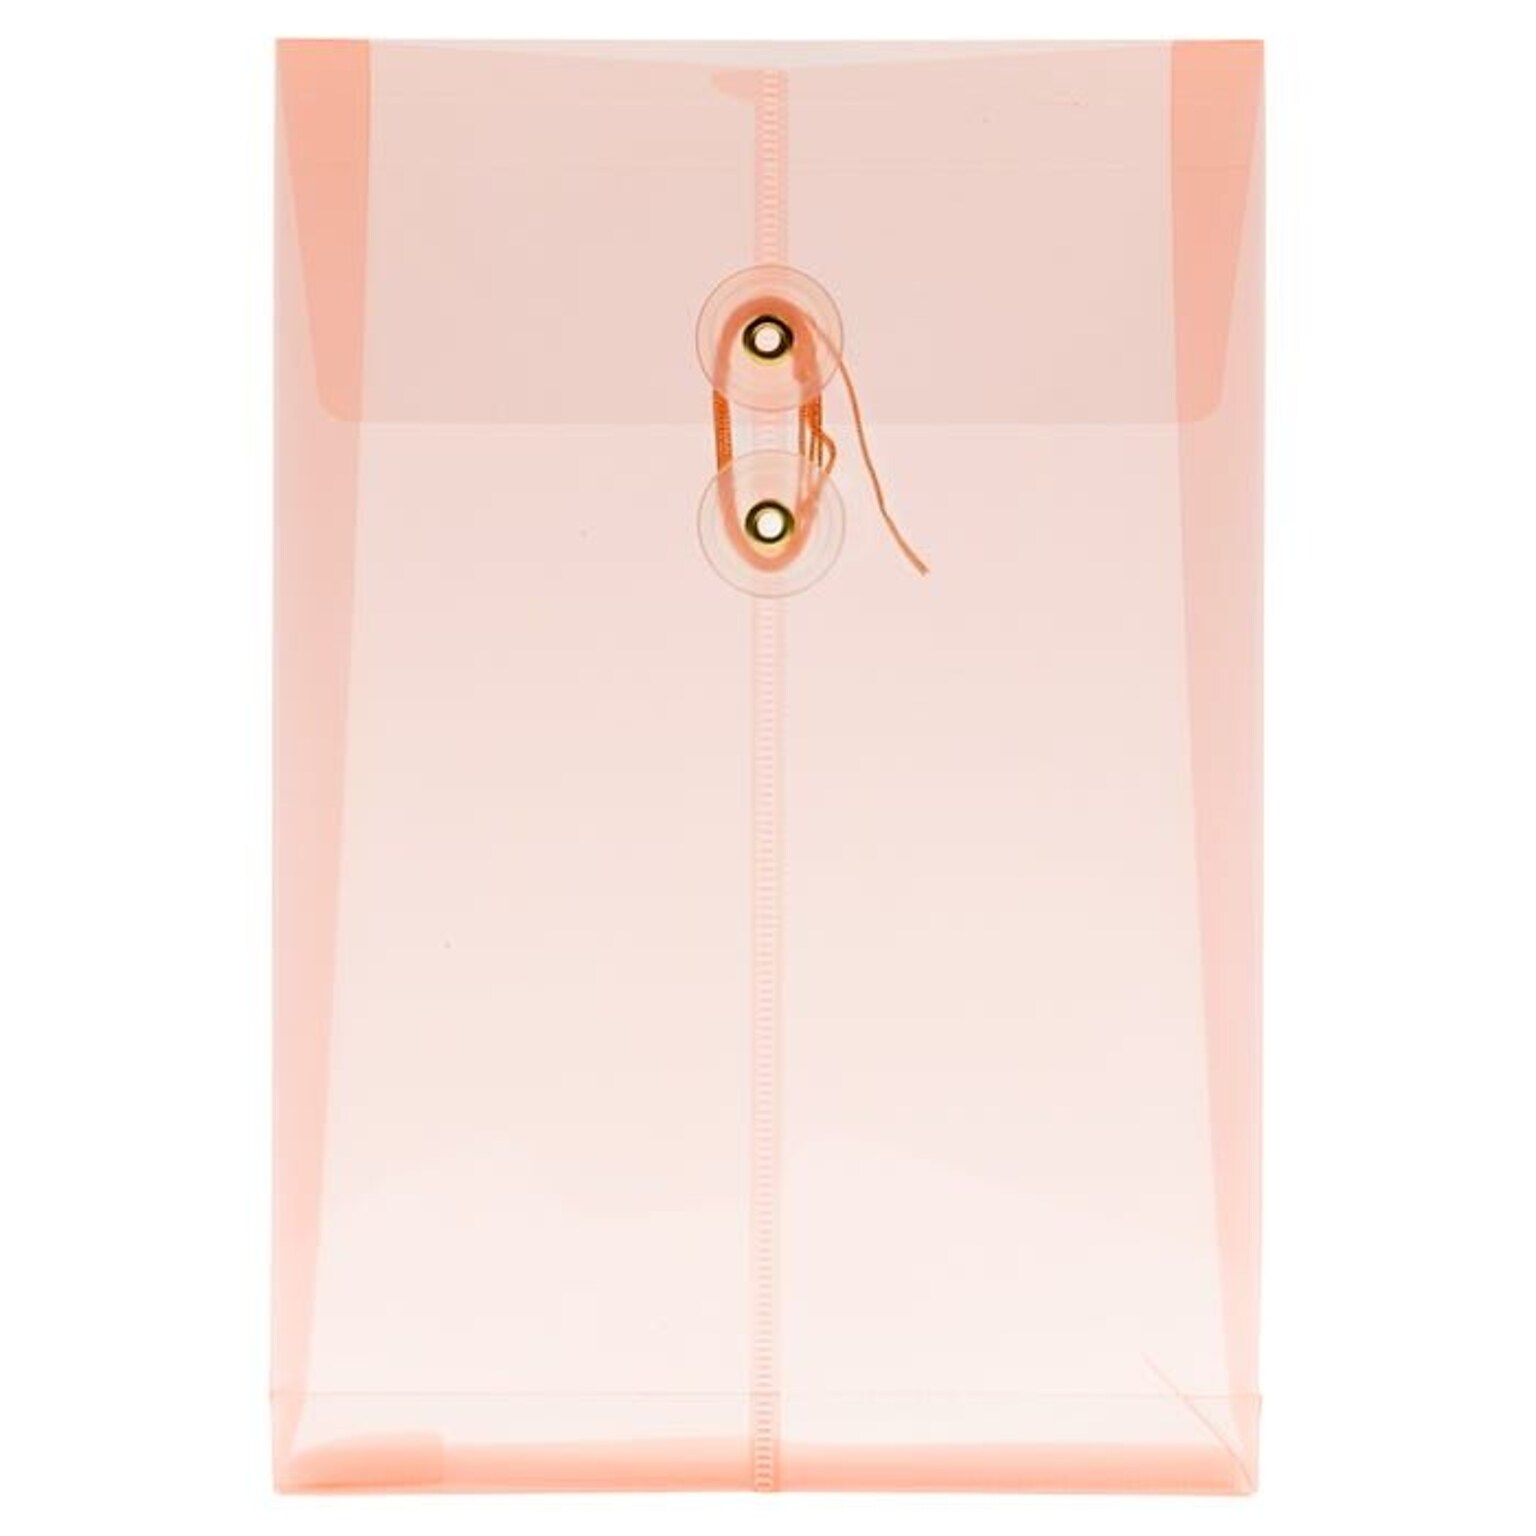 JAM Paper Plastic Envelopes with Button & String Tie Closure, 6 1/2 x 9 1/4, Peach, 12/Pack (33630PCH)